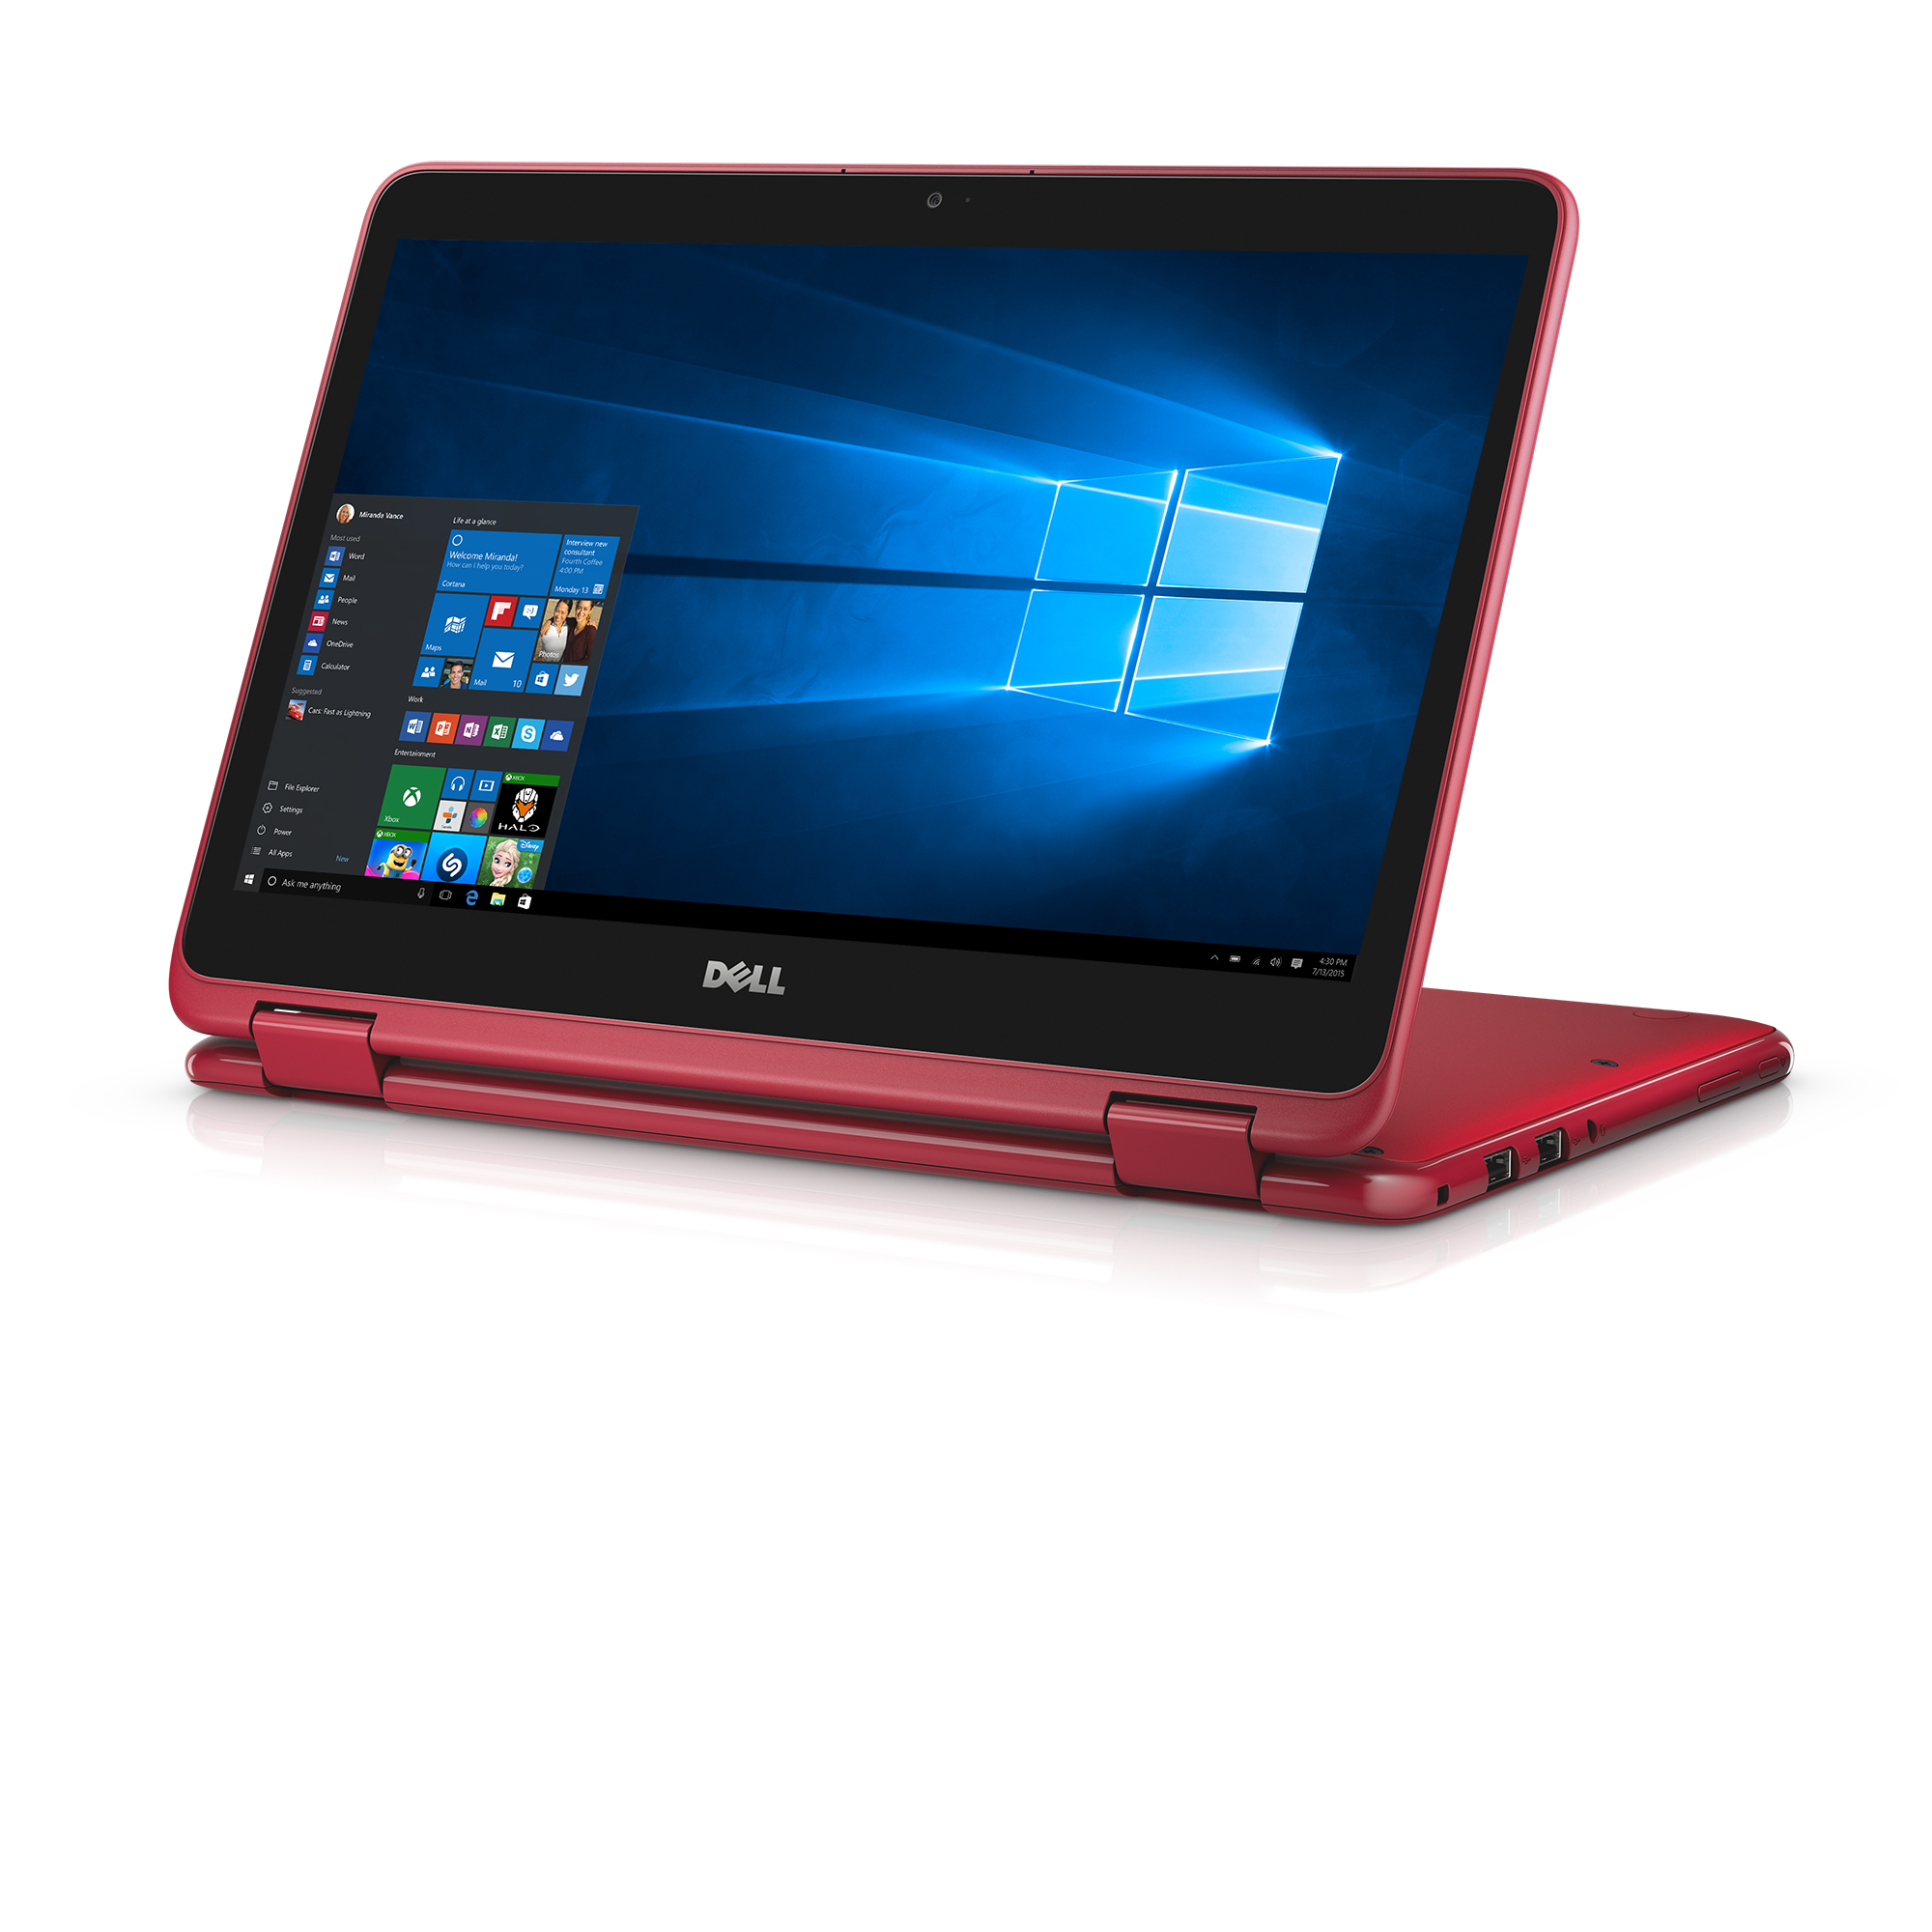 Dell Inspiron 11 3185 2-in-1 Laptop, 11.6", AMD A9, 4GB 2400MHz DDR4, 500 GB HDD, Integrated Graphics, Windows 10 - image 3 of 8